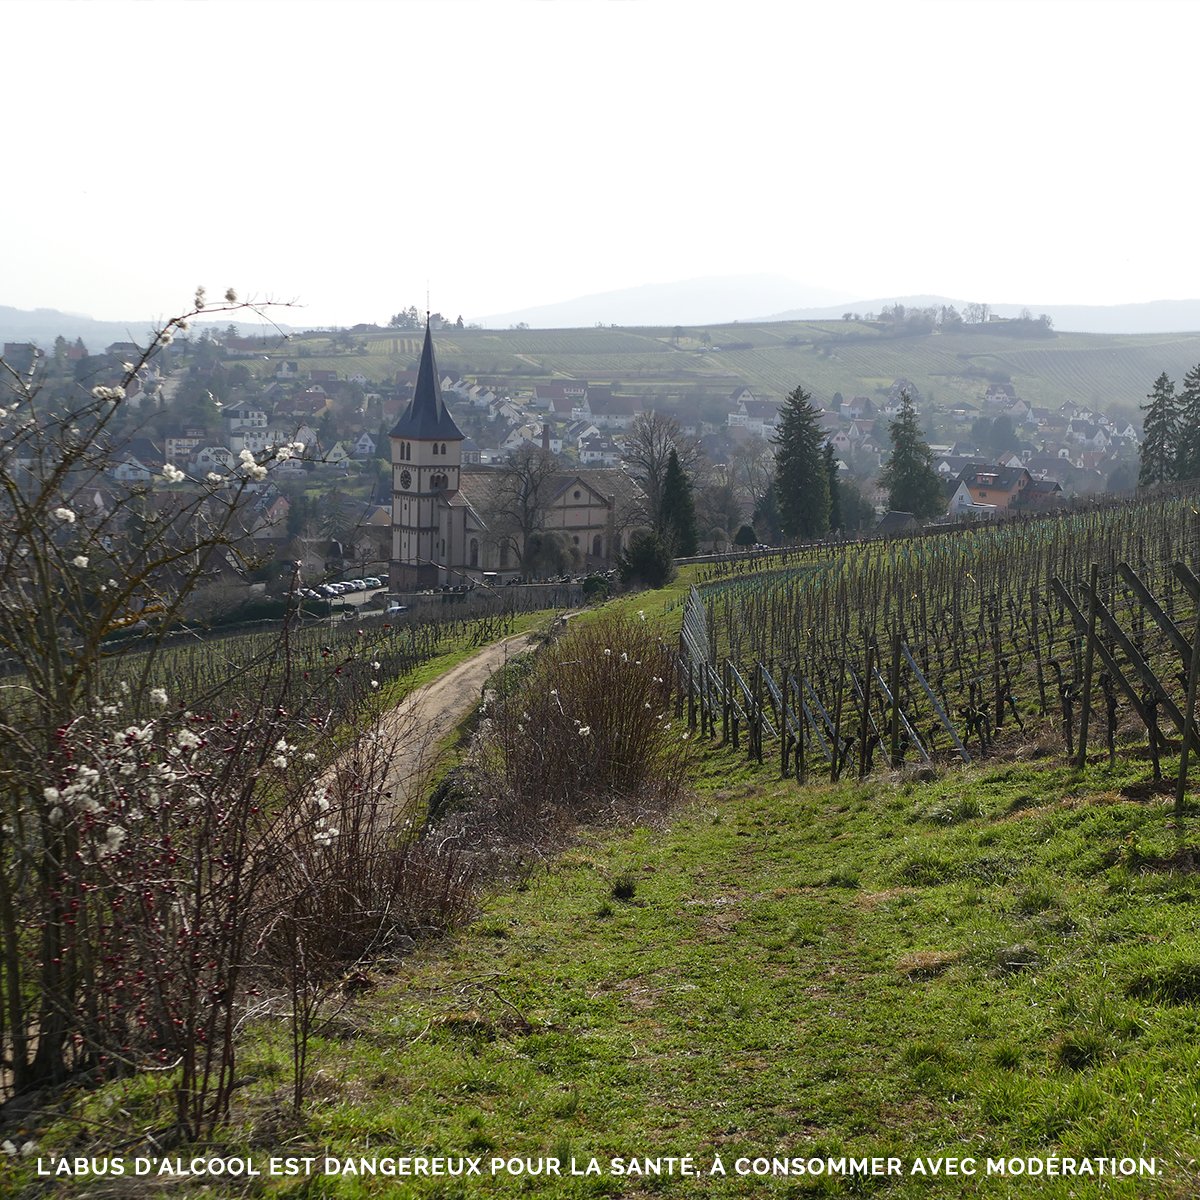 Live from #GrandCru Kirchberg de Barr. This Grand Cru dominates the Barr region, sprawling behind the Maison Willm. This #terroir and its ideal sun exposure make the Barr vineyard optimal for growing the Gewurztraminer varietal.